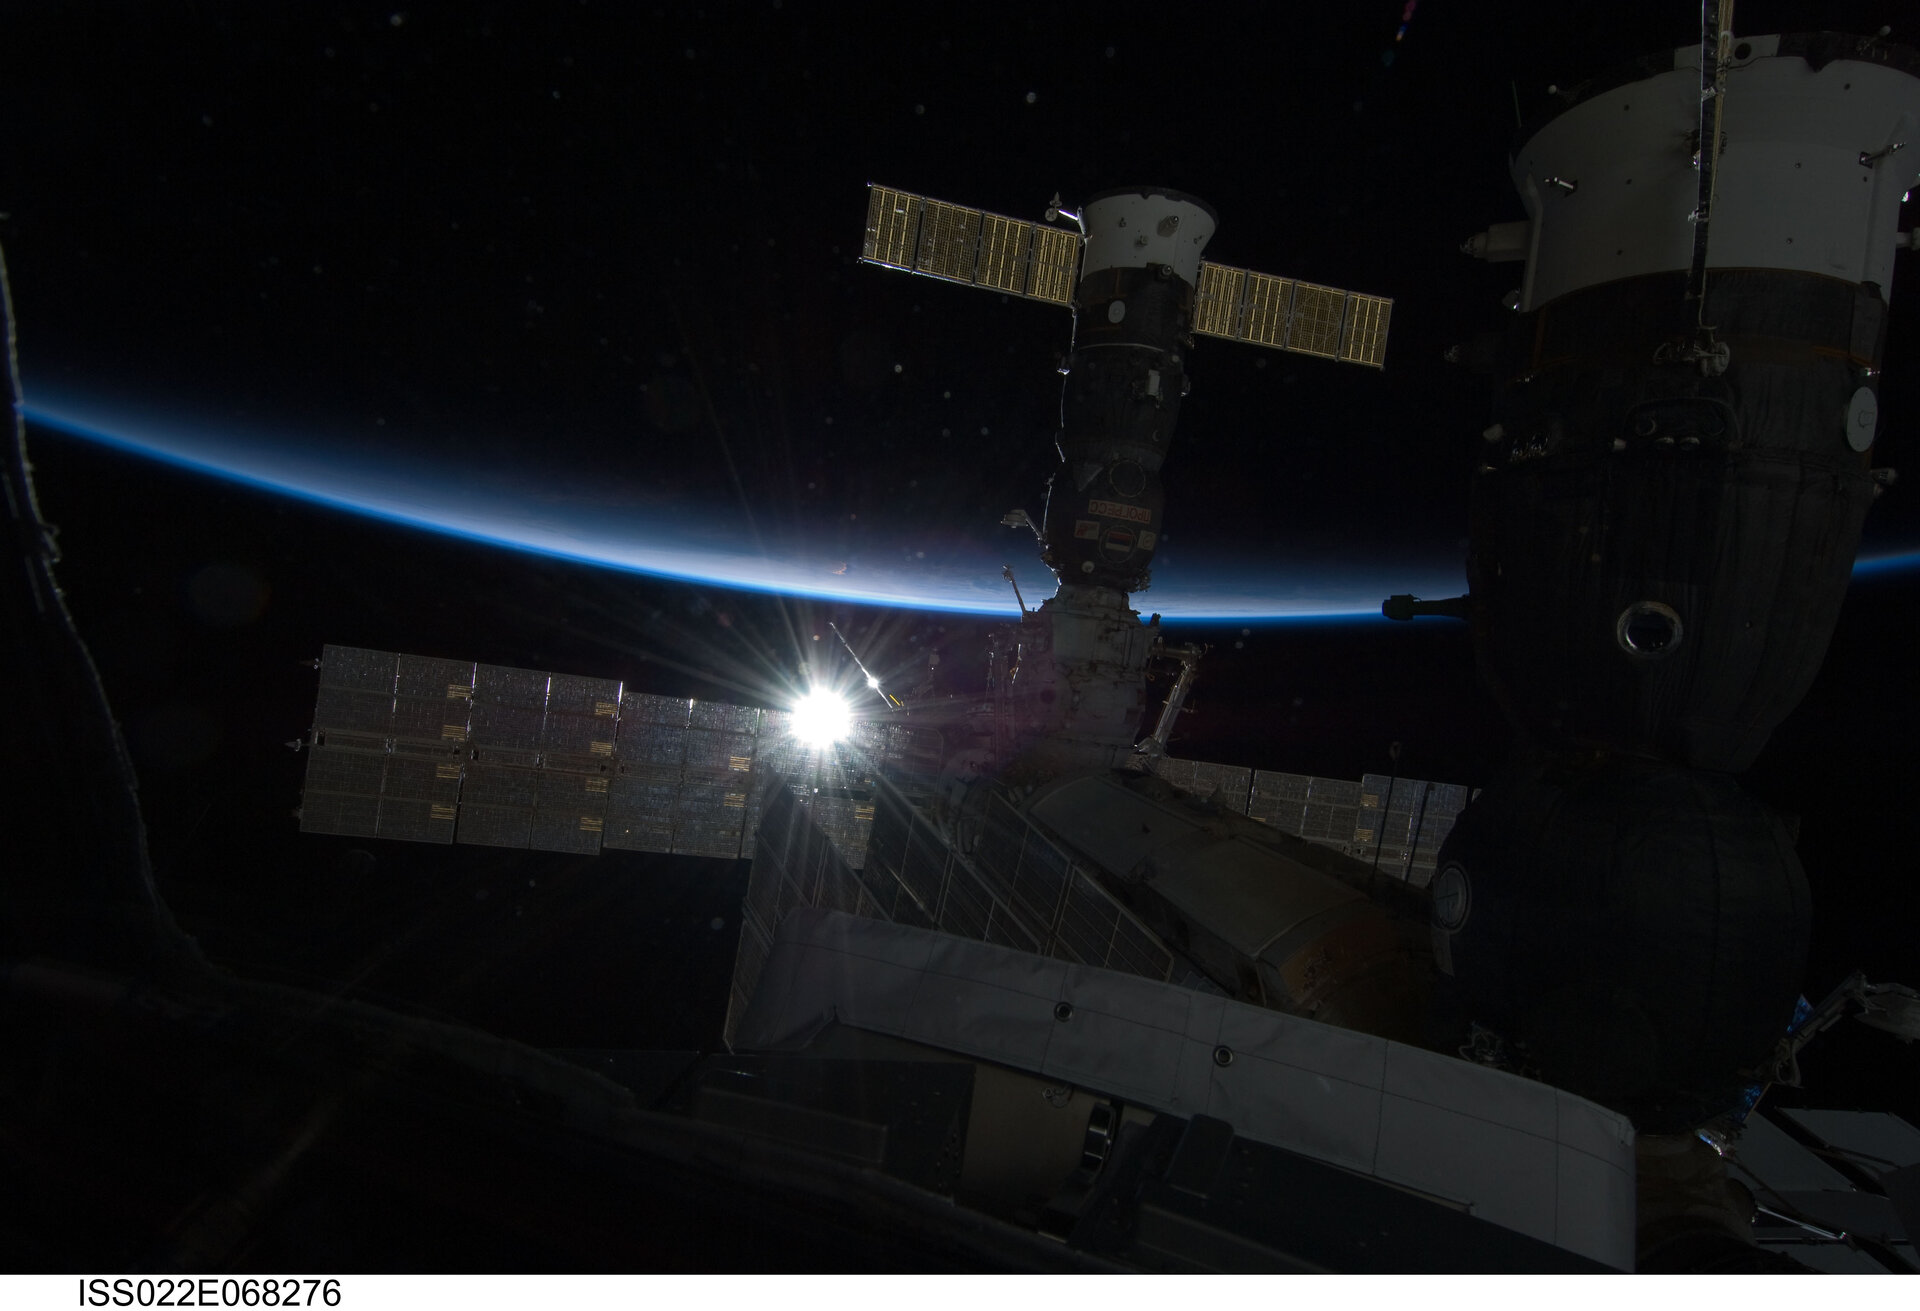 Sunrise from space from the ISS Cupola.